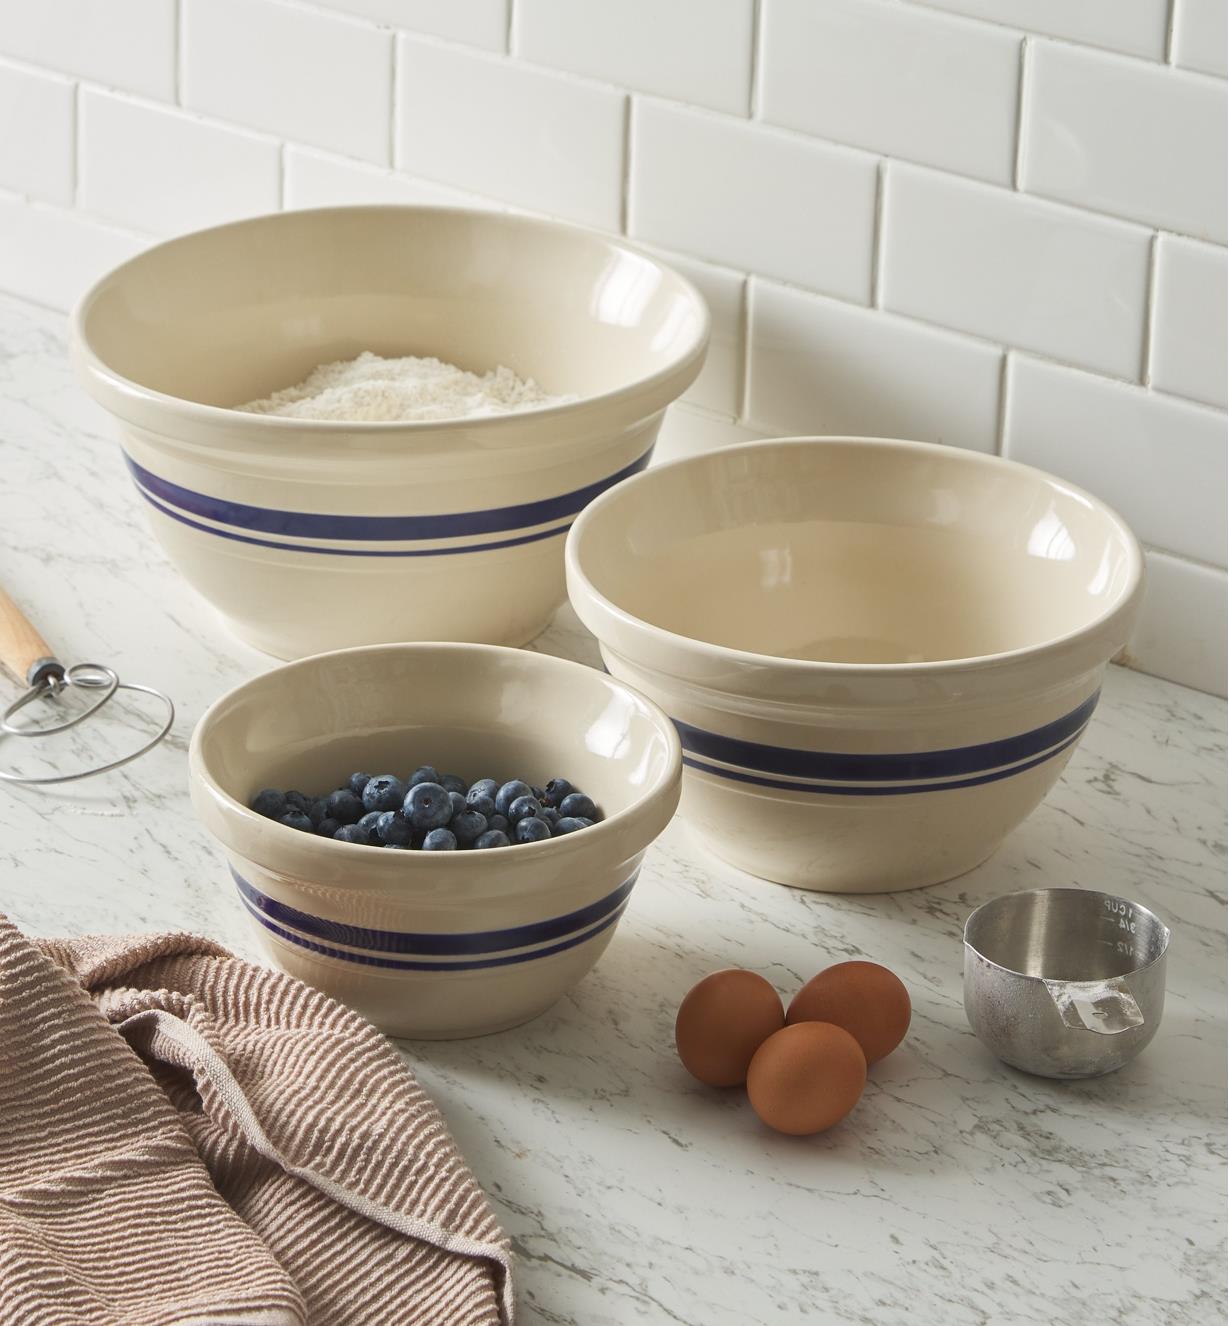 Set of three Dominion mixing bowls on a countertop with baking ingredients